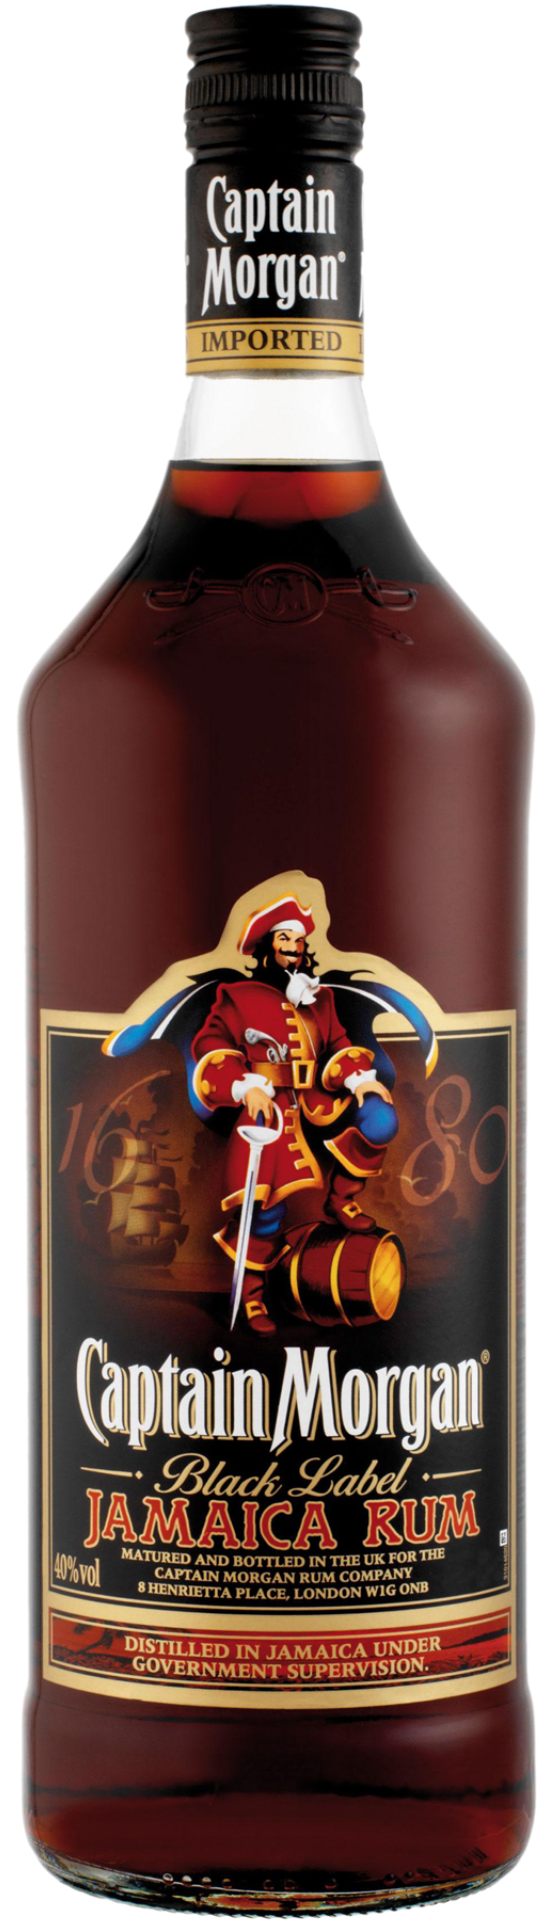 A Bottle Of Liquor With A Pirate On It